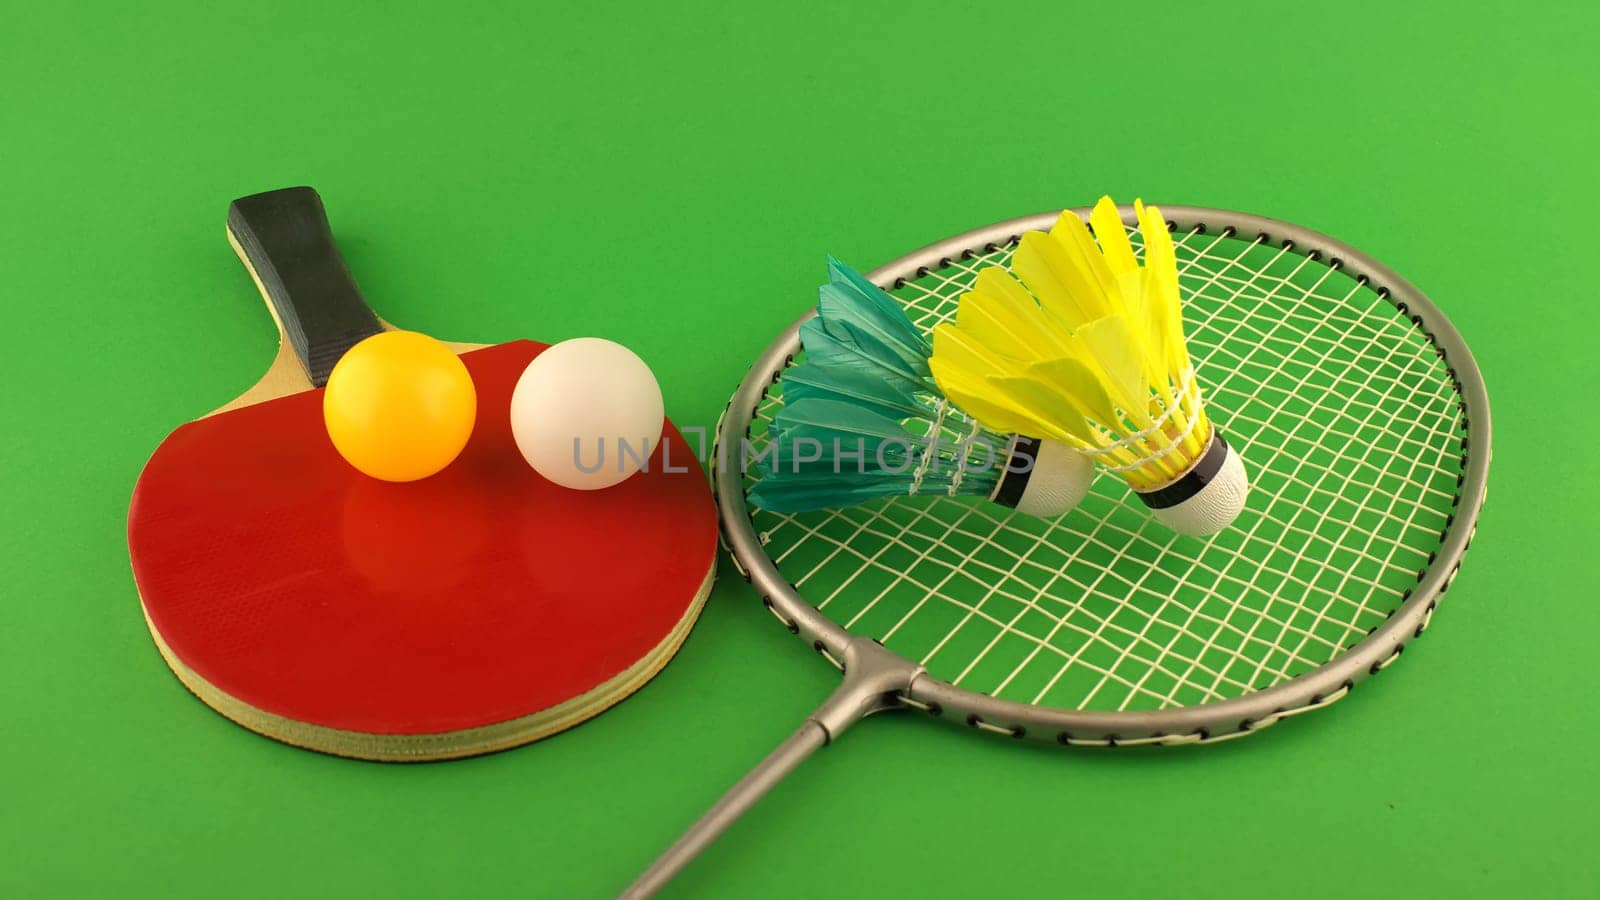 Sports equipment for table tennis and badminton by NetPix